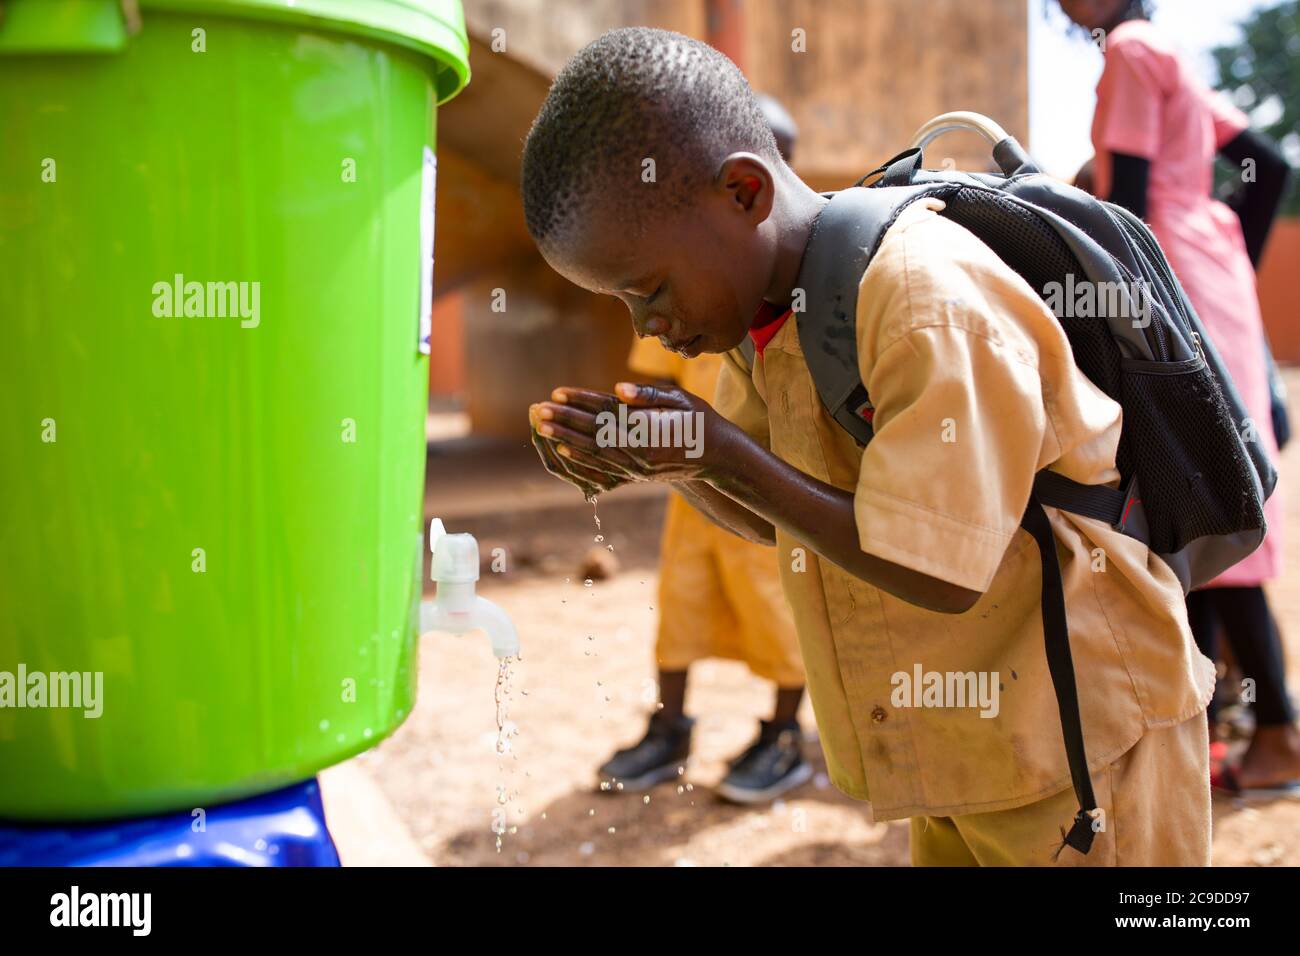 A child washes his hands at a hand washing station at his school in Conakry, Guinea, West Africa. Stock Photo